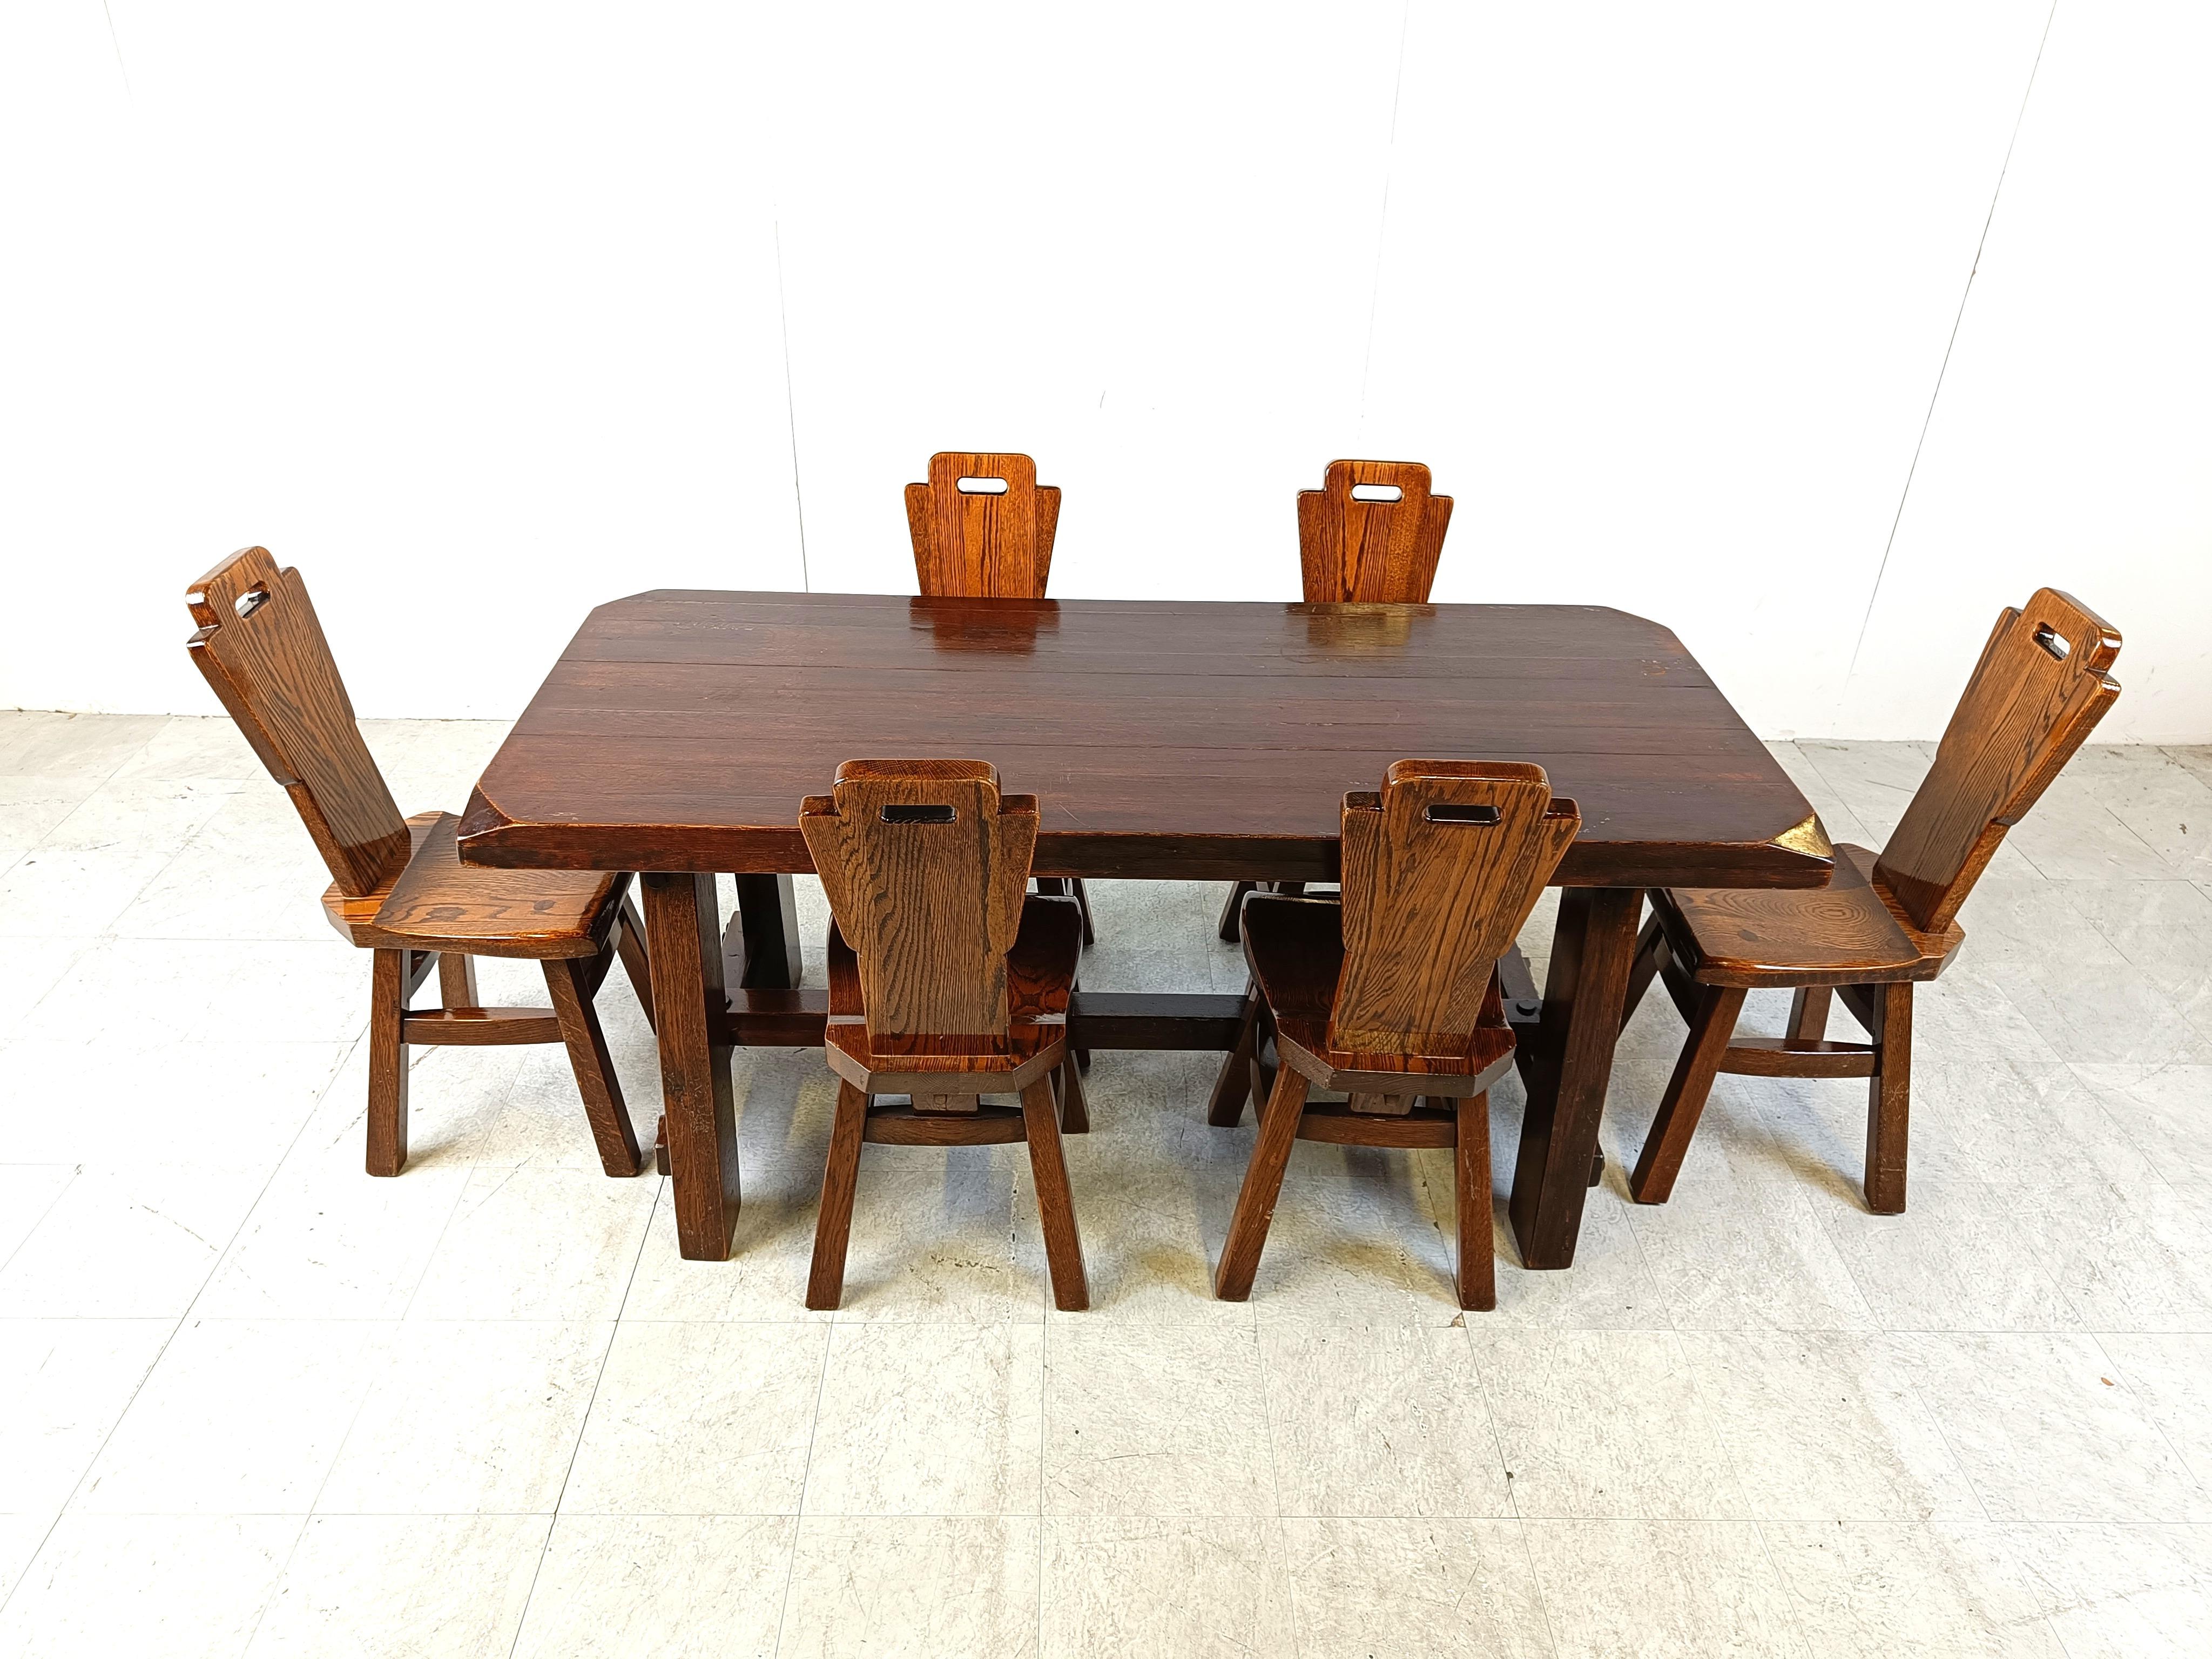 Sturdy and handcrafted dining chairs with matching table.

The entire set is made out of solid oak.

These chairs and table will last for ages.

Good condition.

1960s - Belgium

Dimensions:

Table:
Height: 78cm
Width: 174cm
Depth: